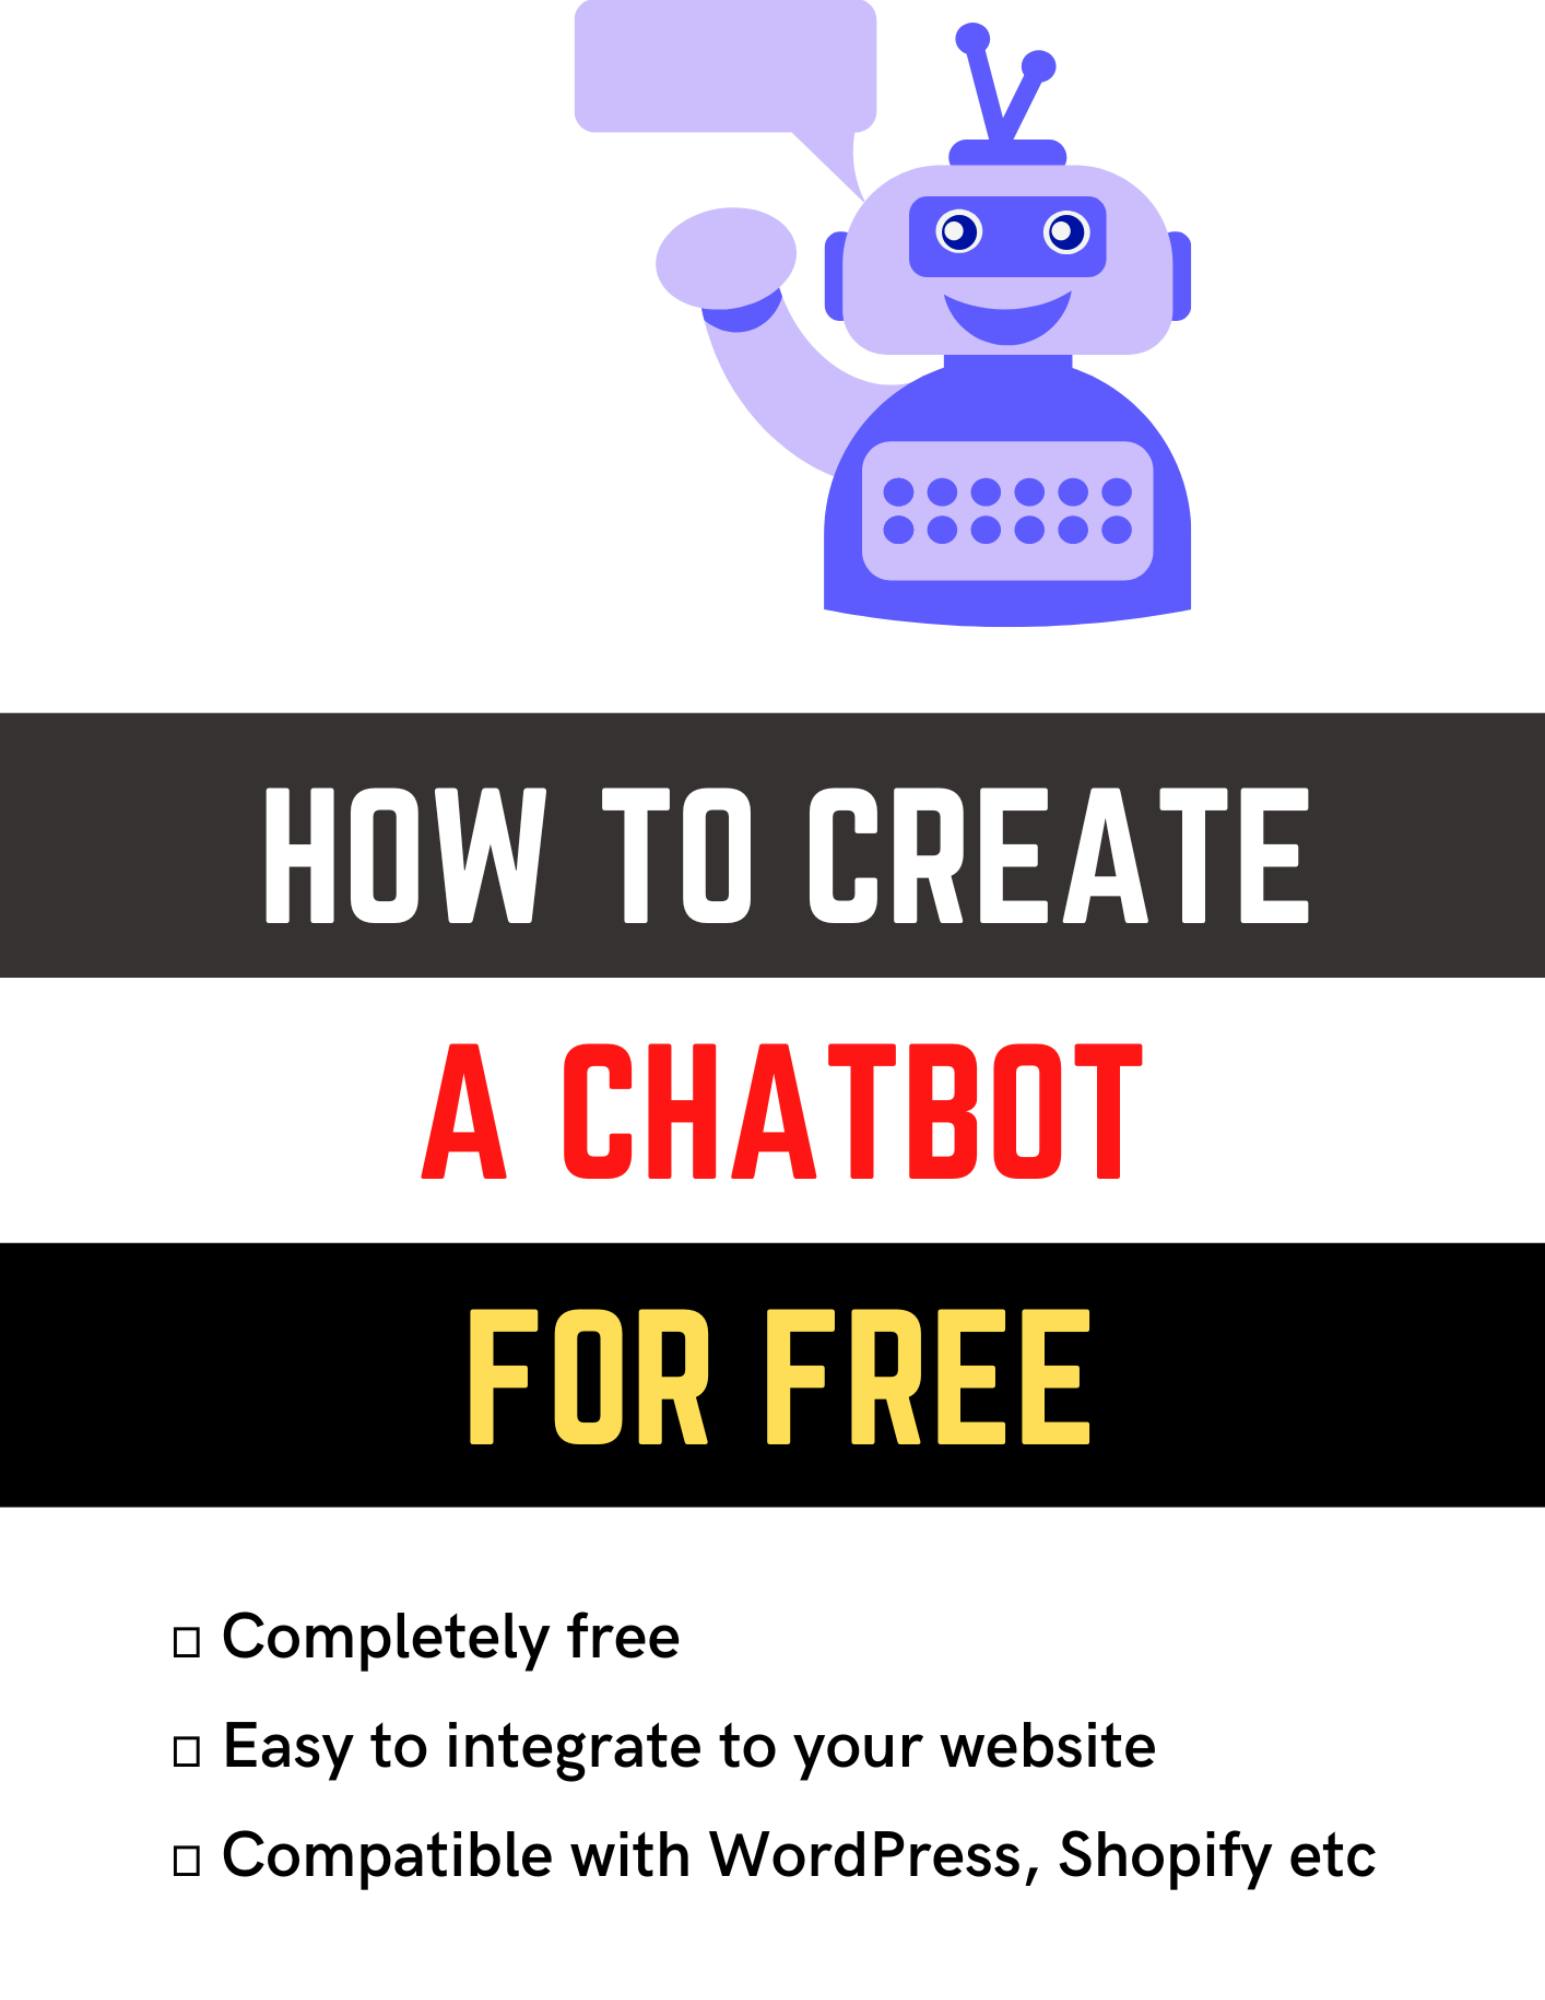 How to create chatbot in WordPress, JavaScipt and facebook